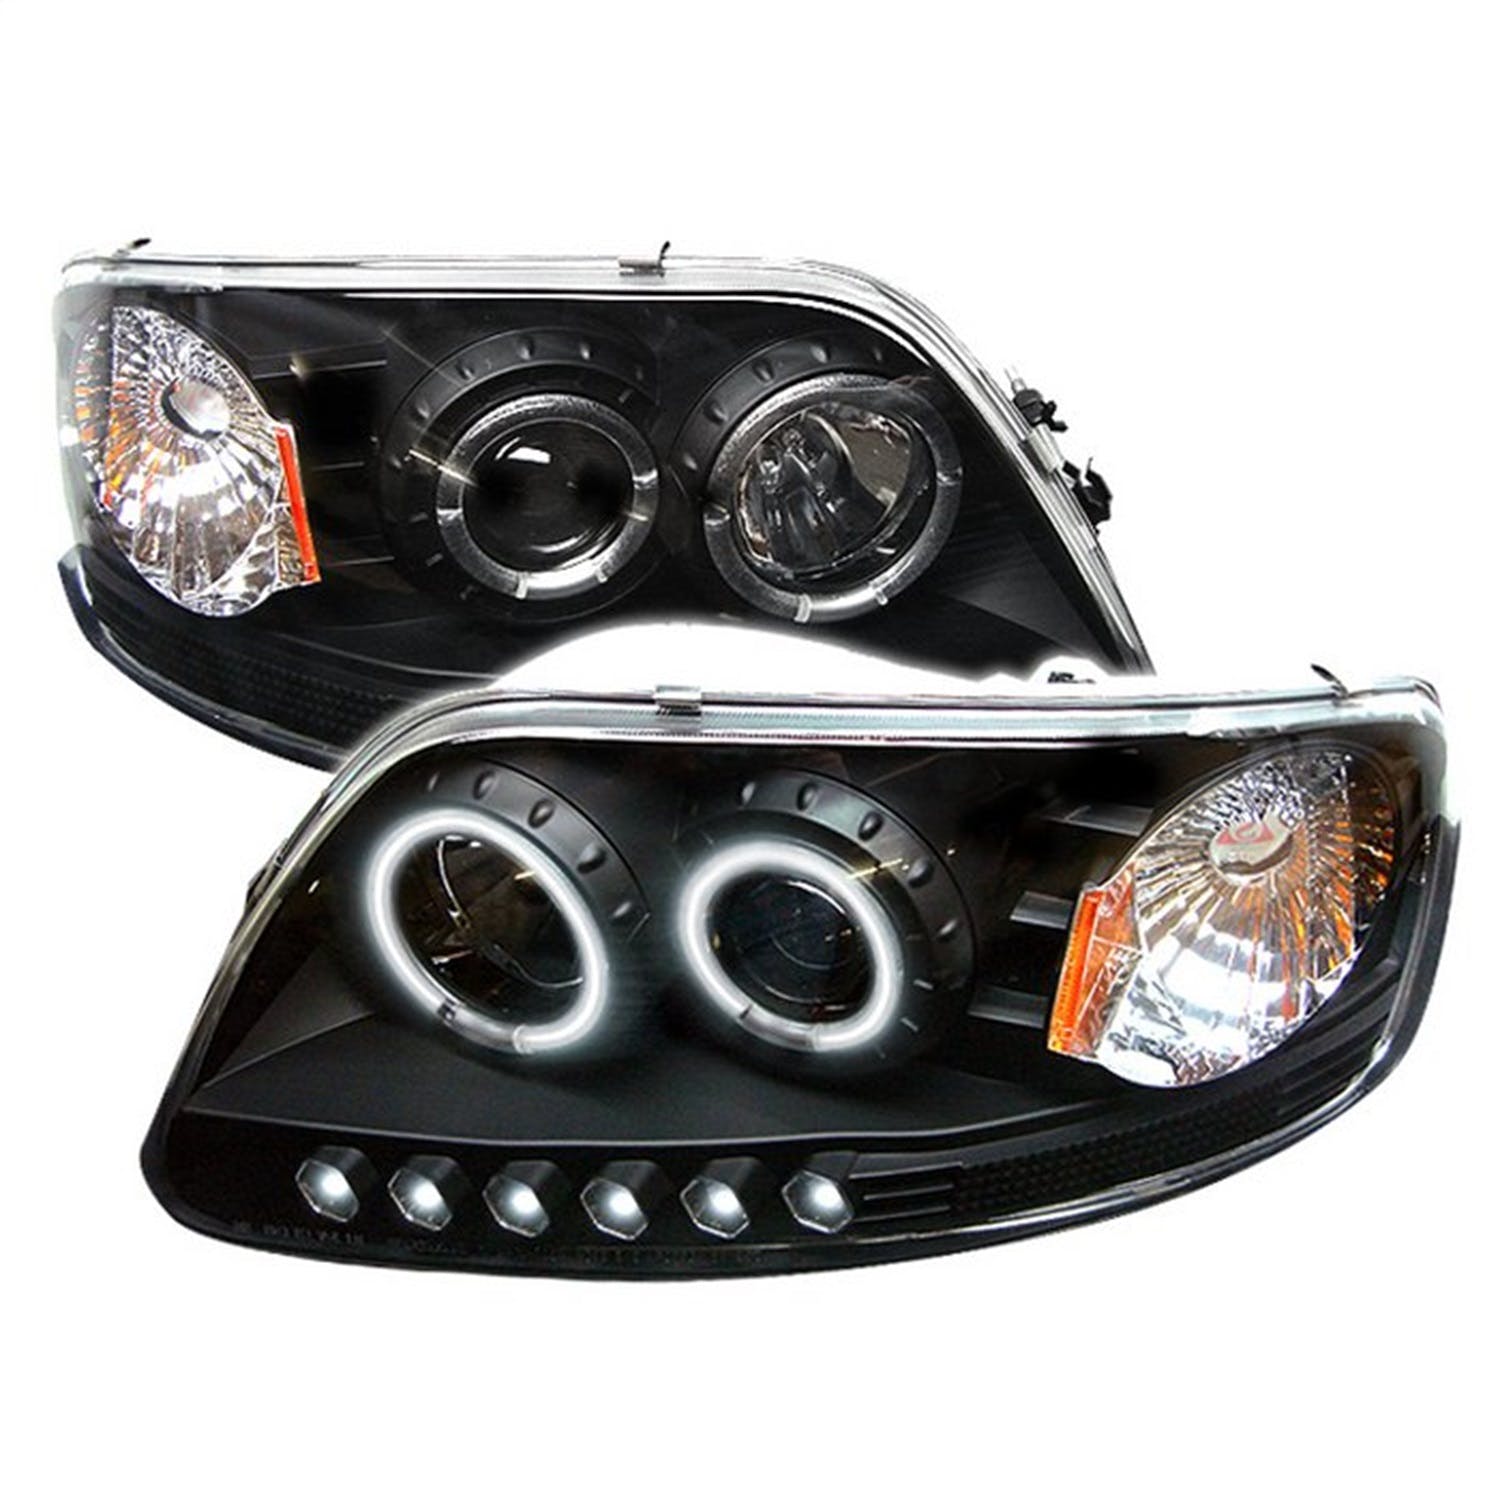 Spyder Auto 5010292 (Spyder) Ford F150 97-03/Expedition 97-02 1PC Projector Headlights-( Will Not Fi